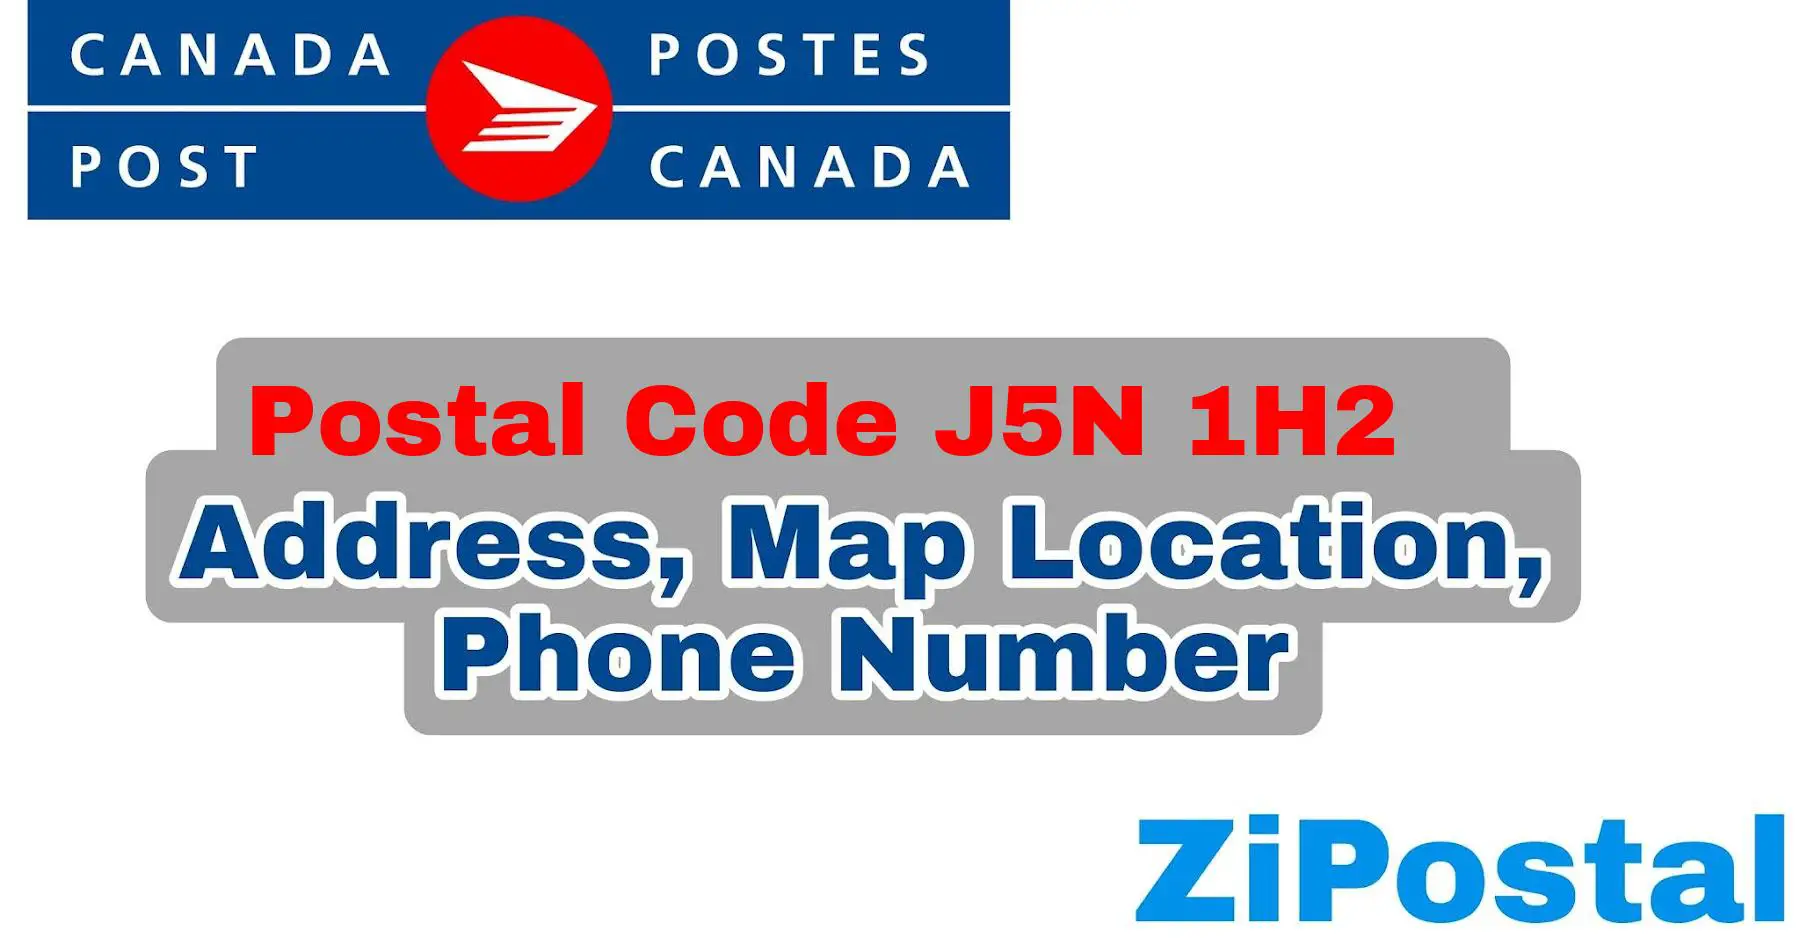 Postal Code J5N 1H2 Address Map Location and Phone Number